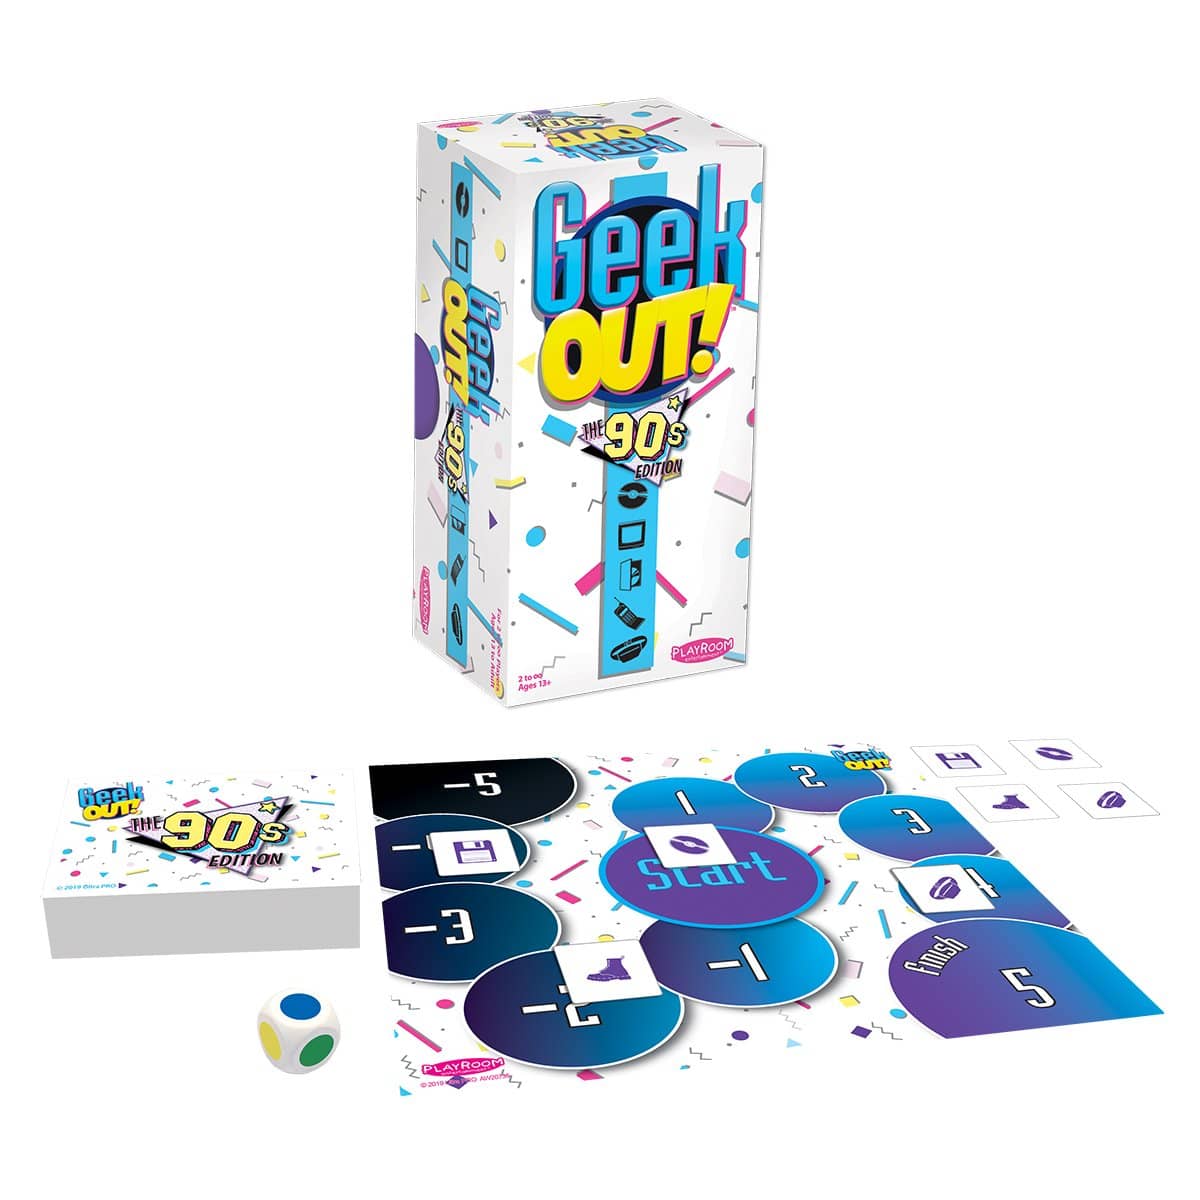 Geek Out! Trivia Party Game: The 90s Edition | Ultra PRO Entertainment